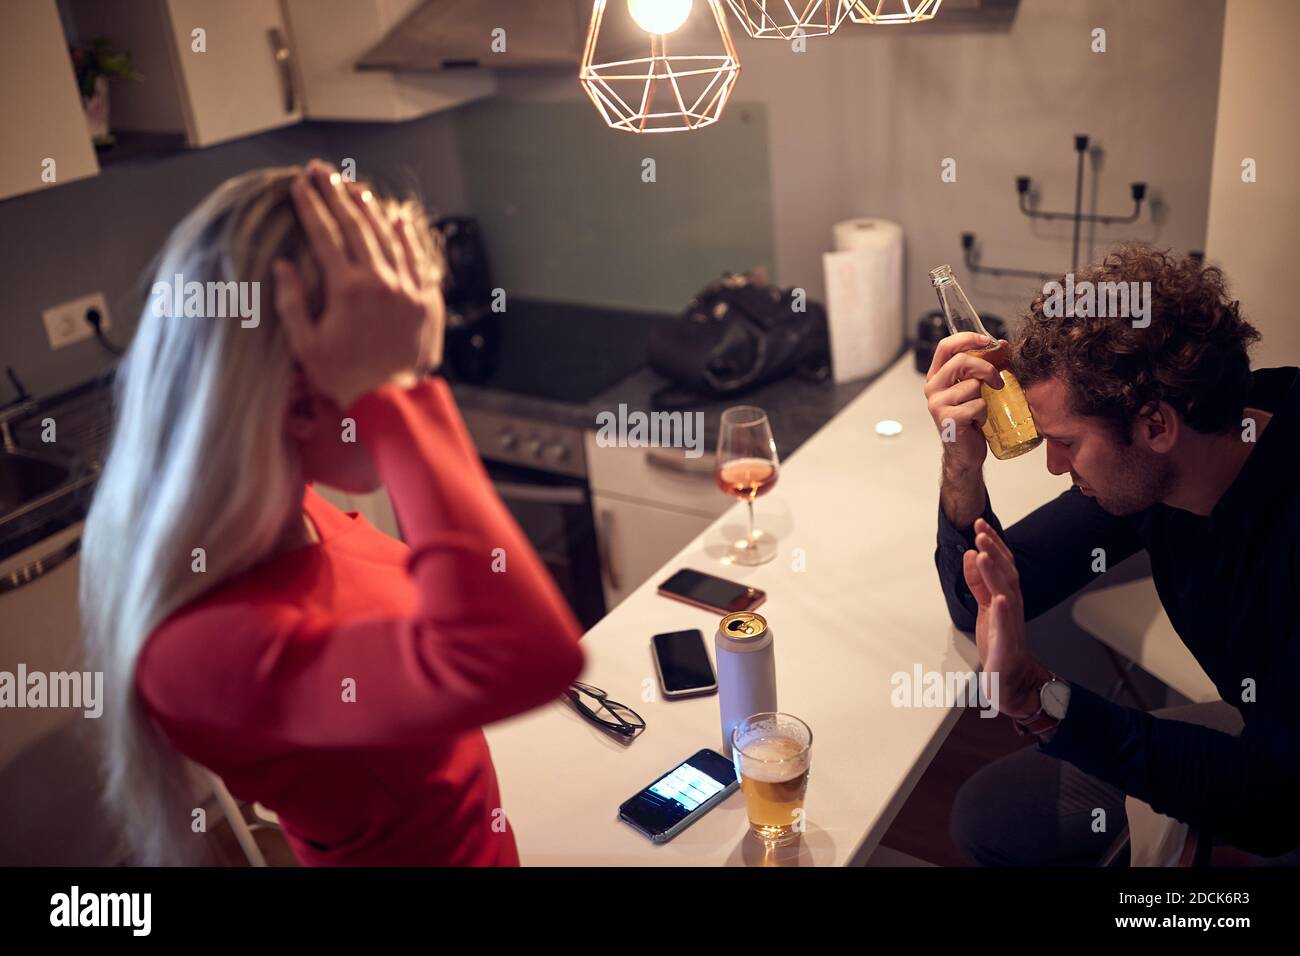 worried female trying to talk with drunk male. alcohol issue concept Stock Photo